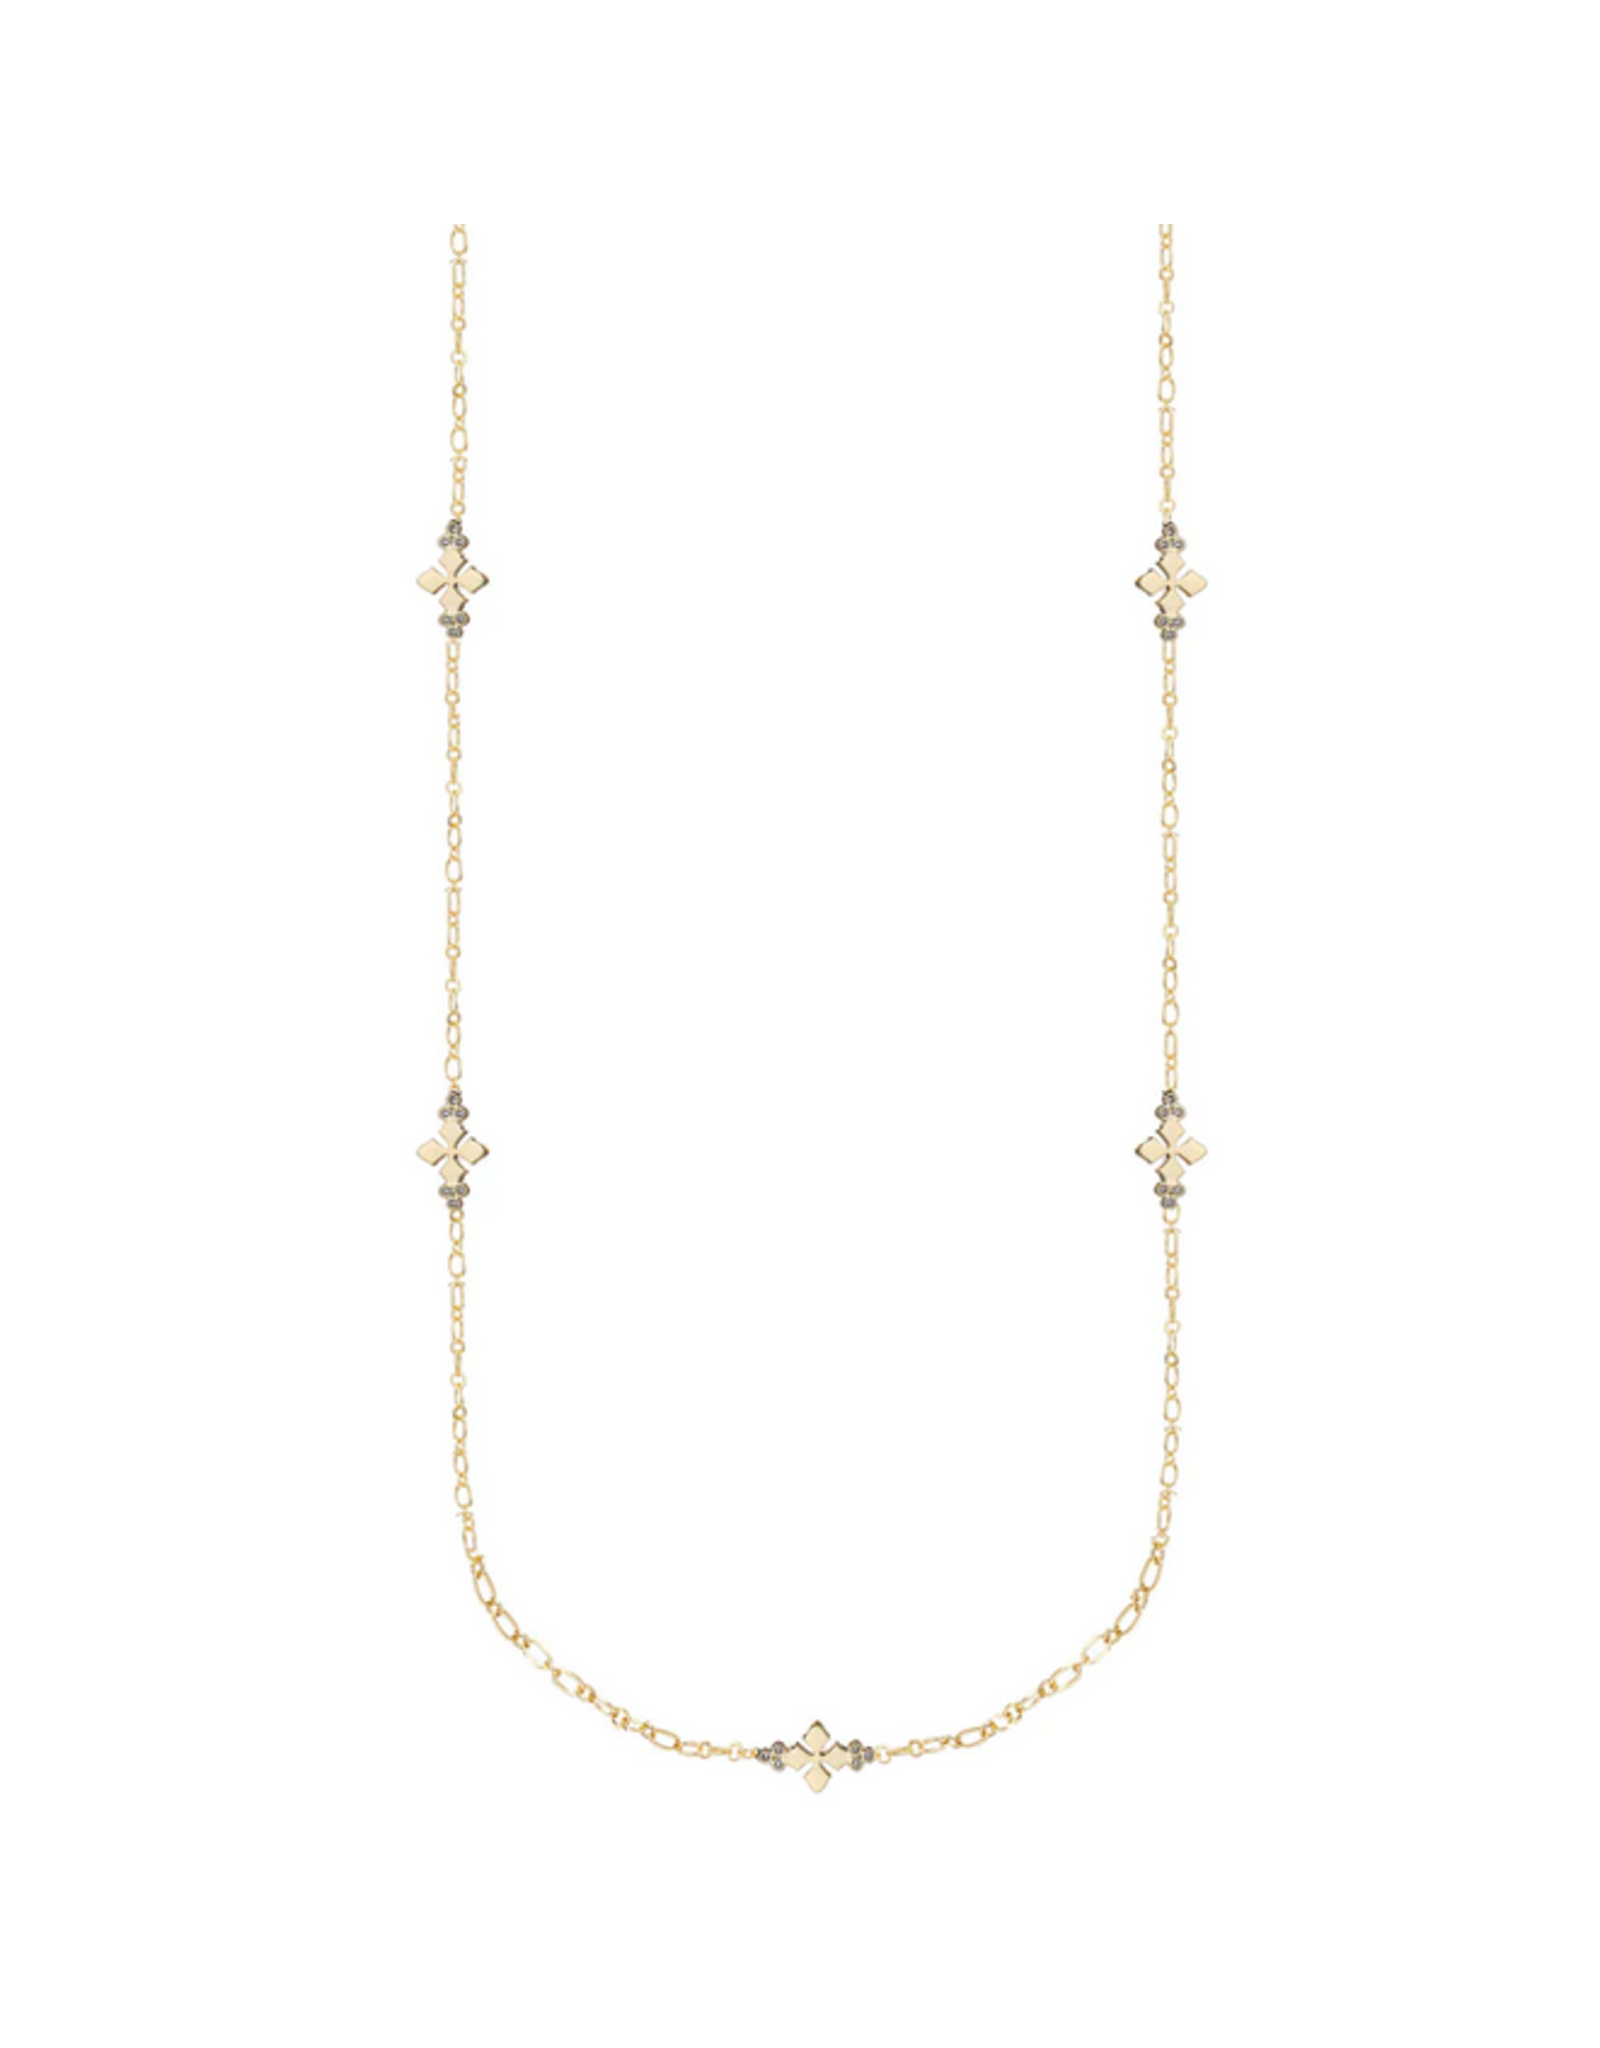 Natalie Wood Believer Cross Station Necklace Gold